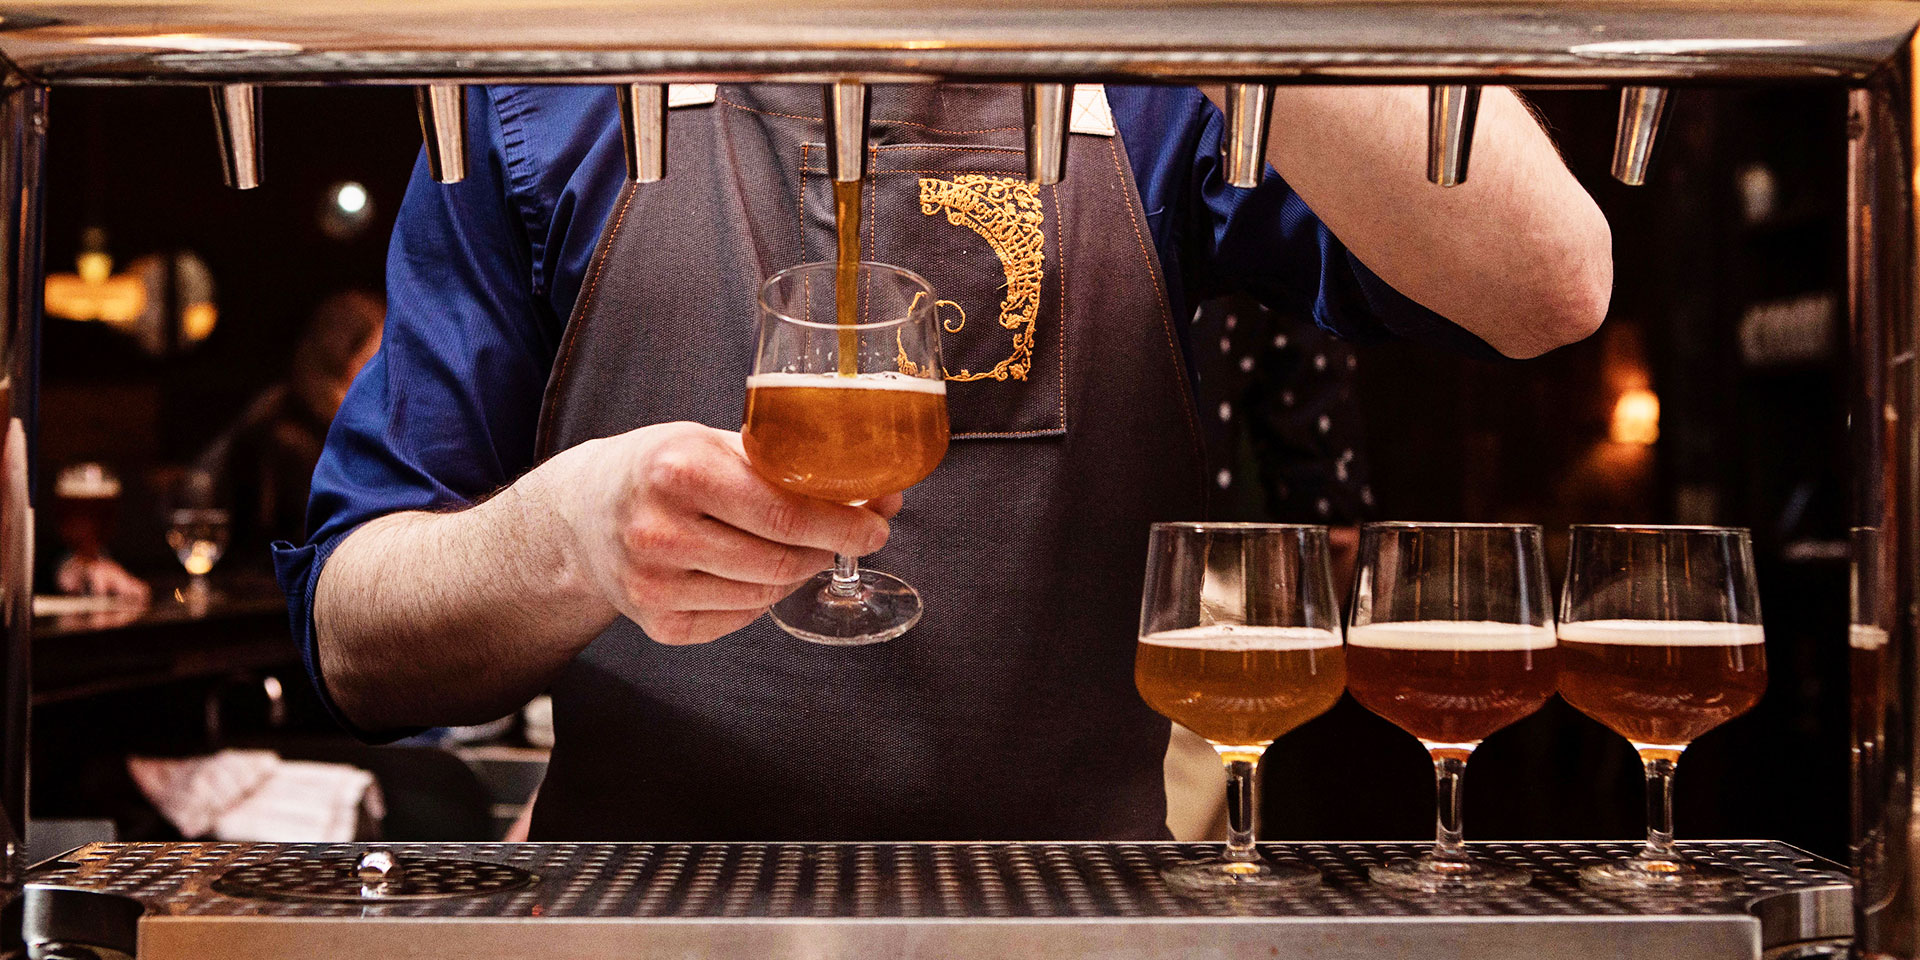 Chicago Has a Craft Beer Scene. Here’s Where to Go